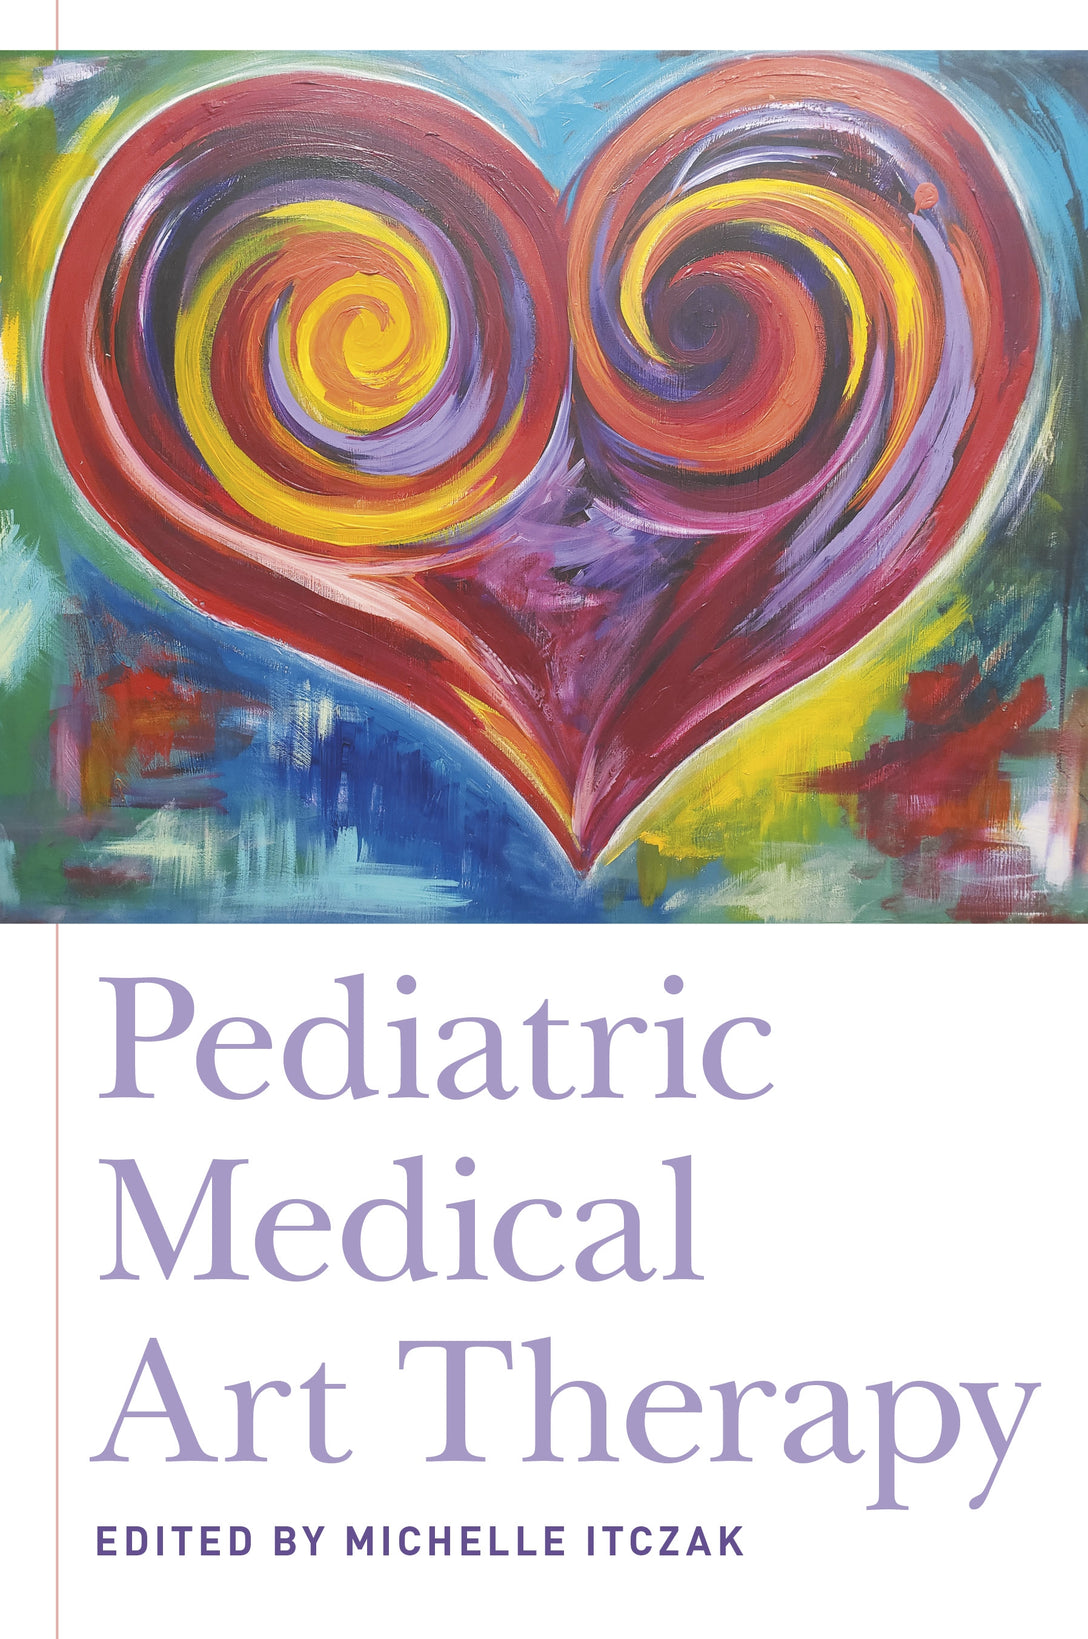 Pediatric Medical Art Therapy by No Author Listed, Michelle Itczak